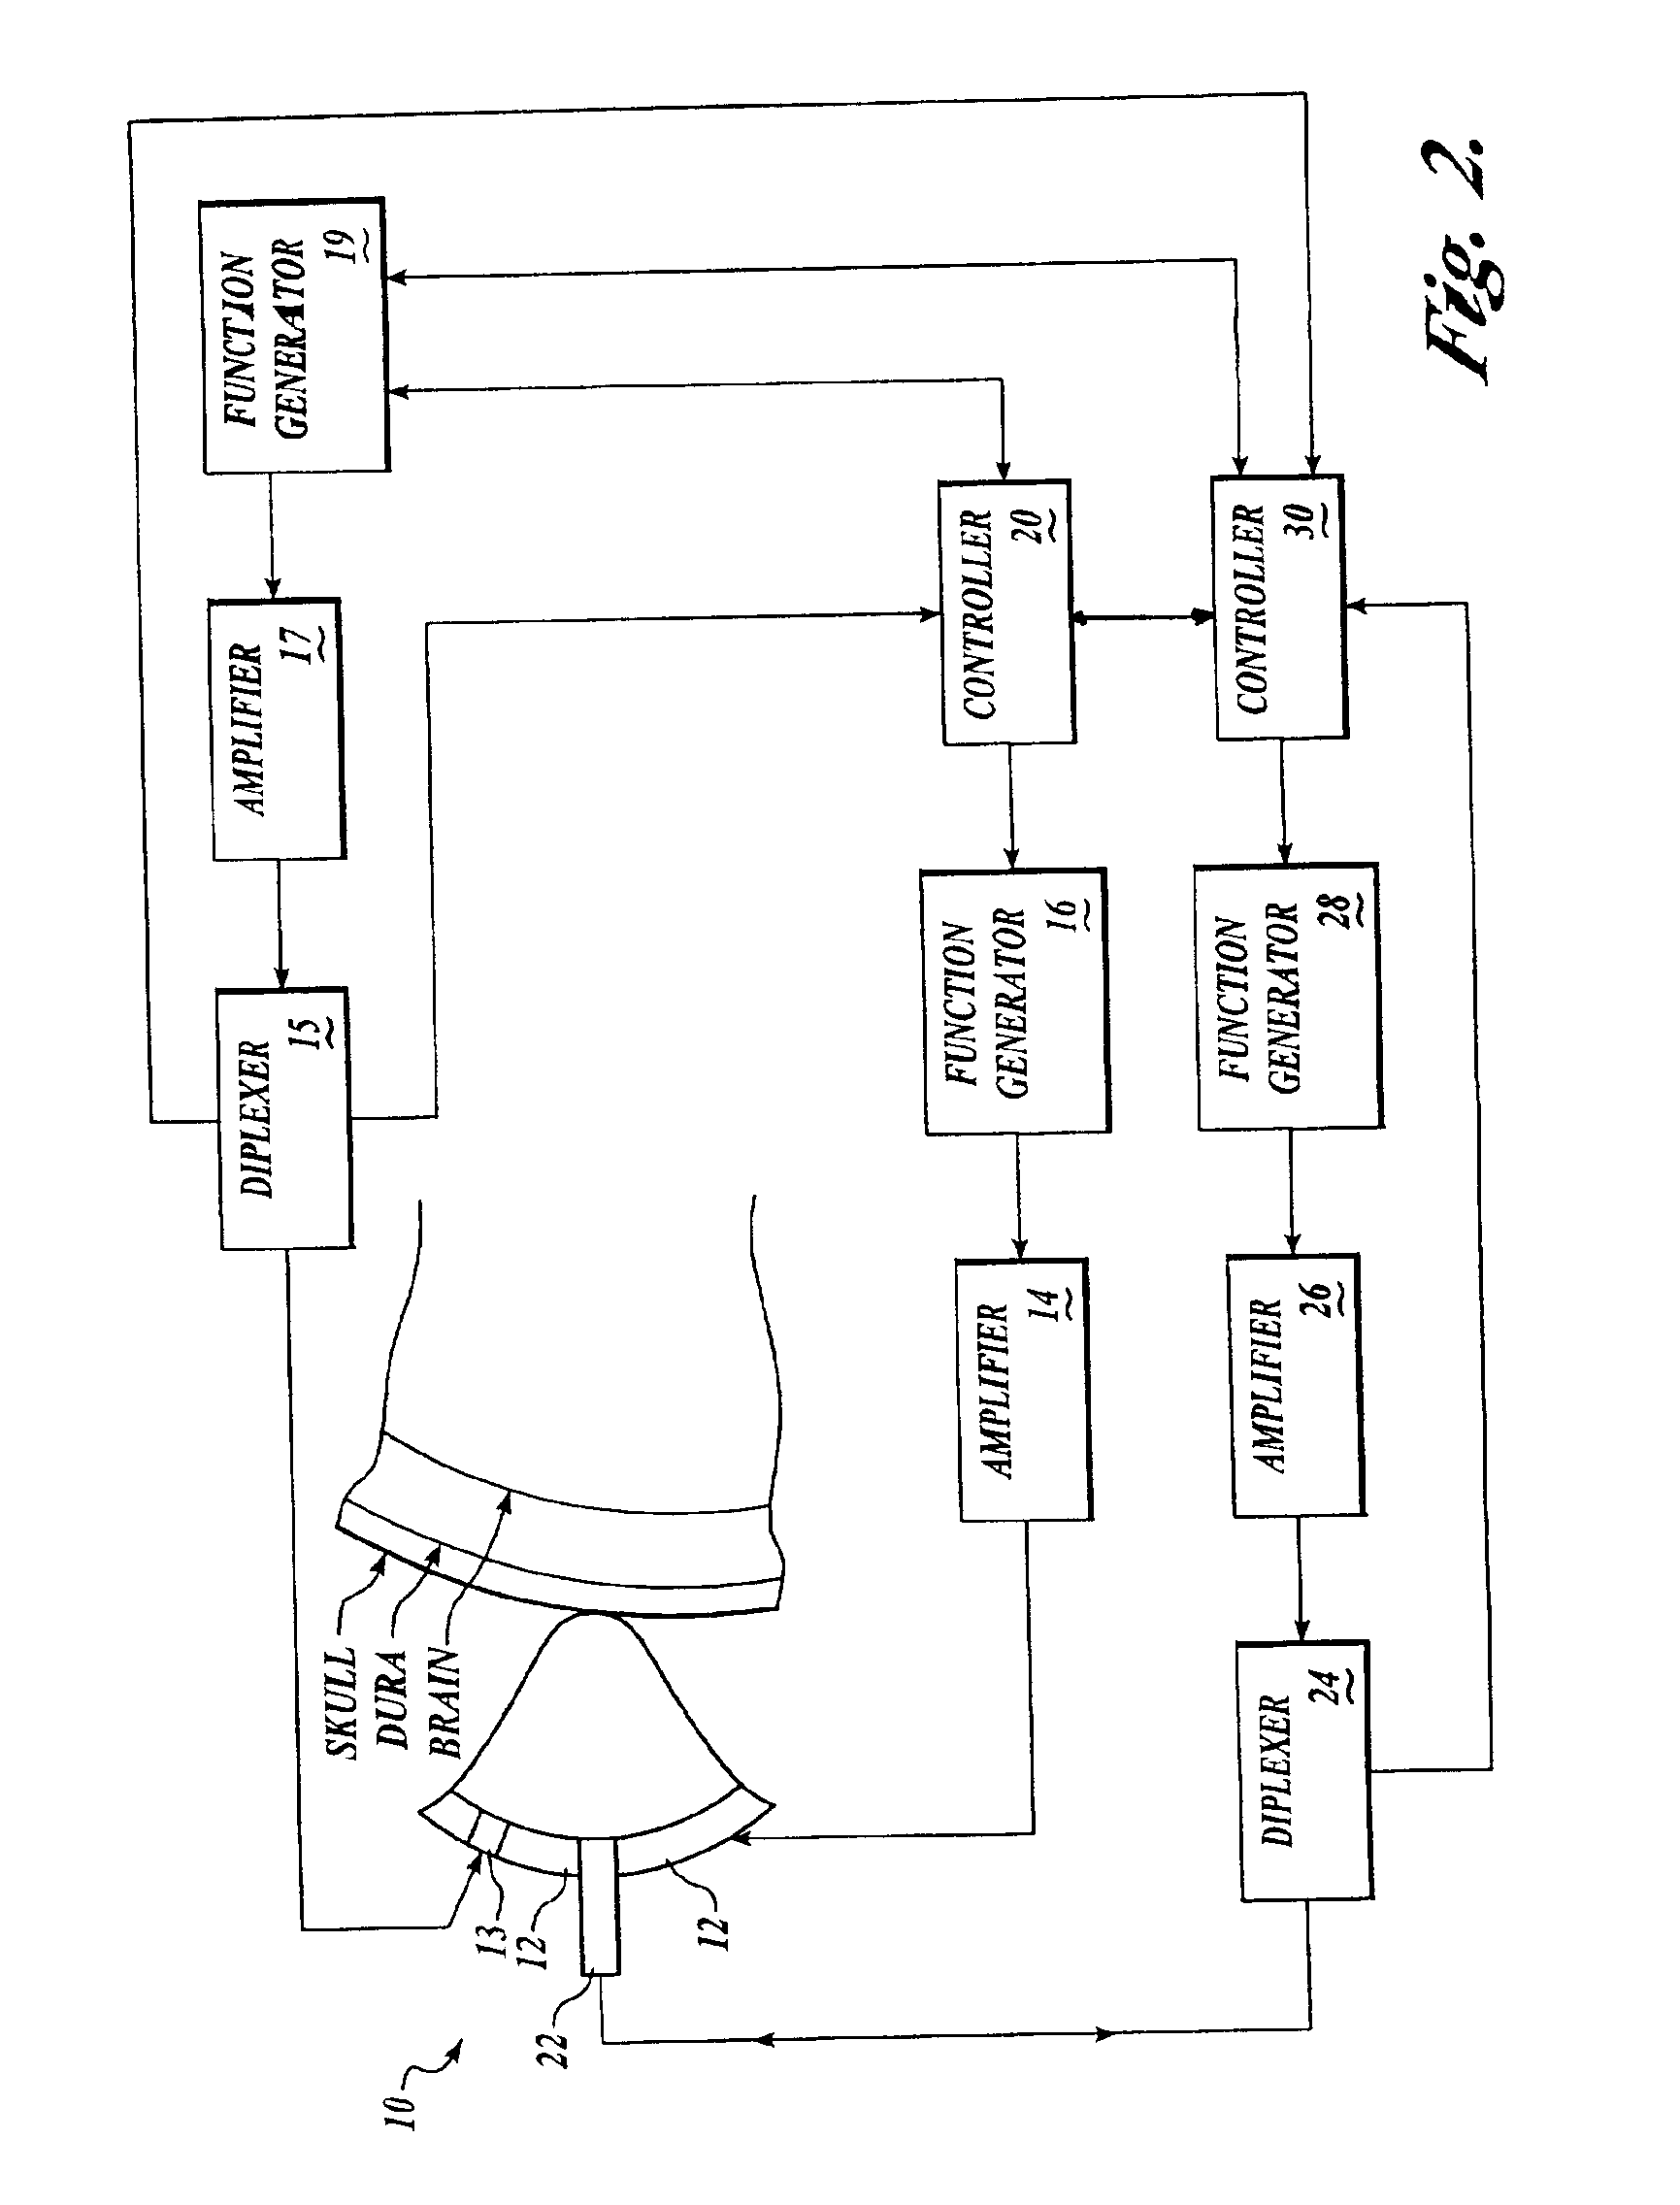 Systems and methods for making noninvasive physiological assessments